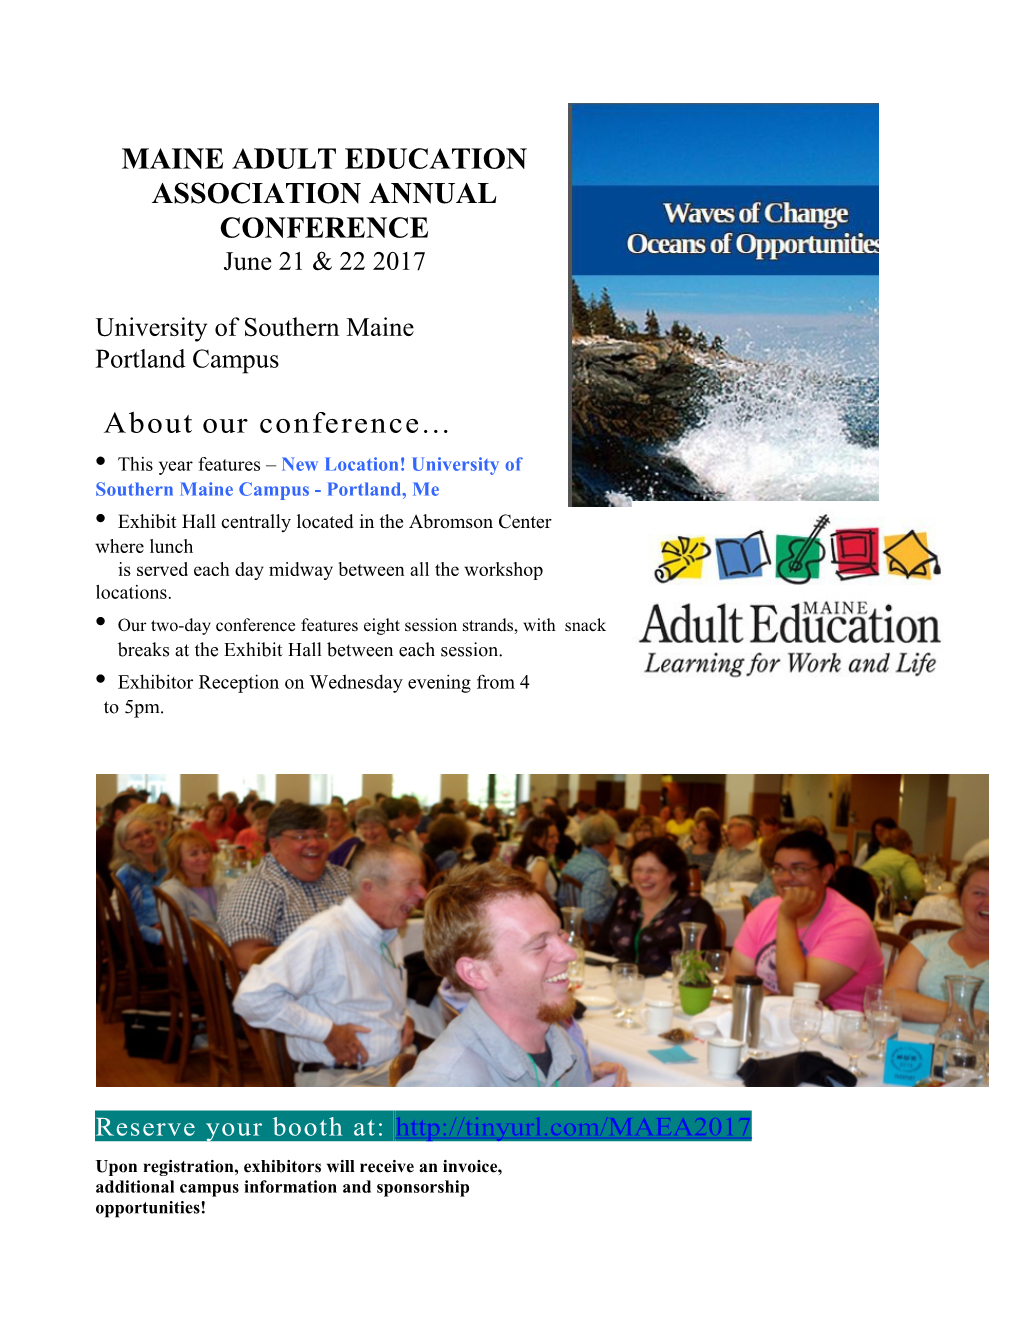 Maine Adult Education Association Annual Conference